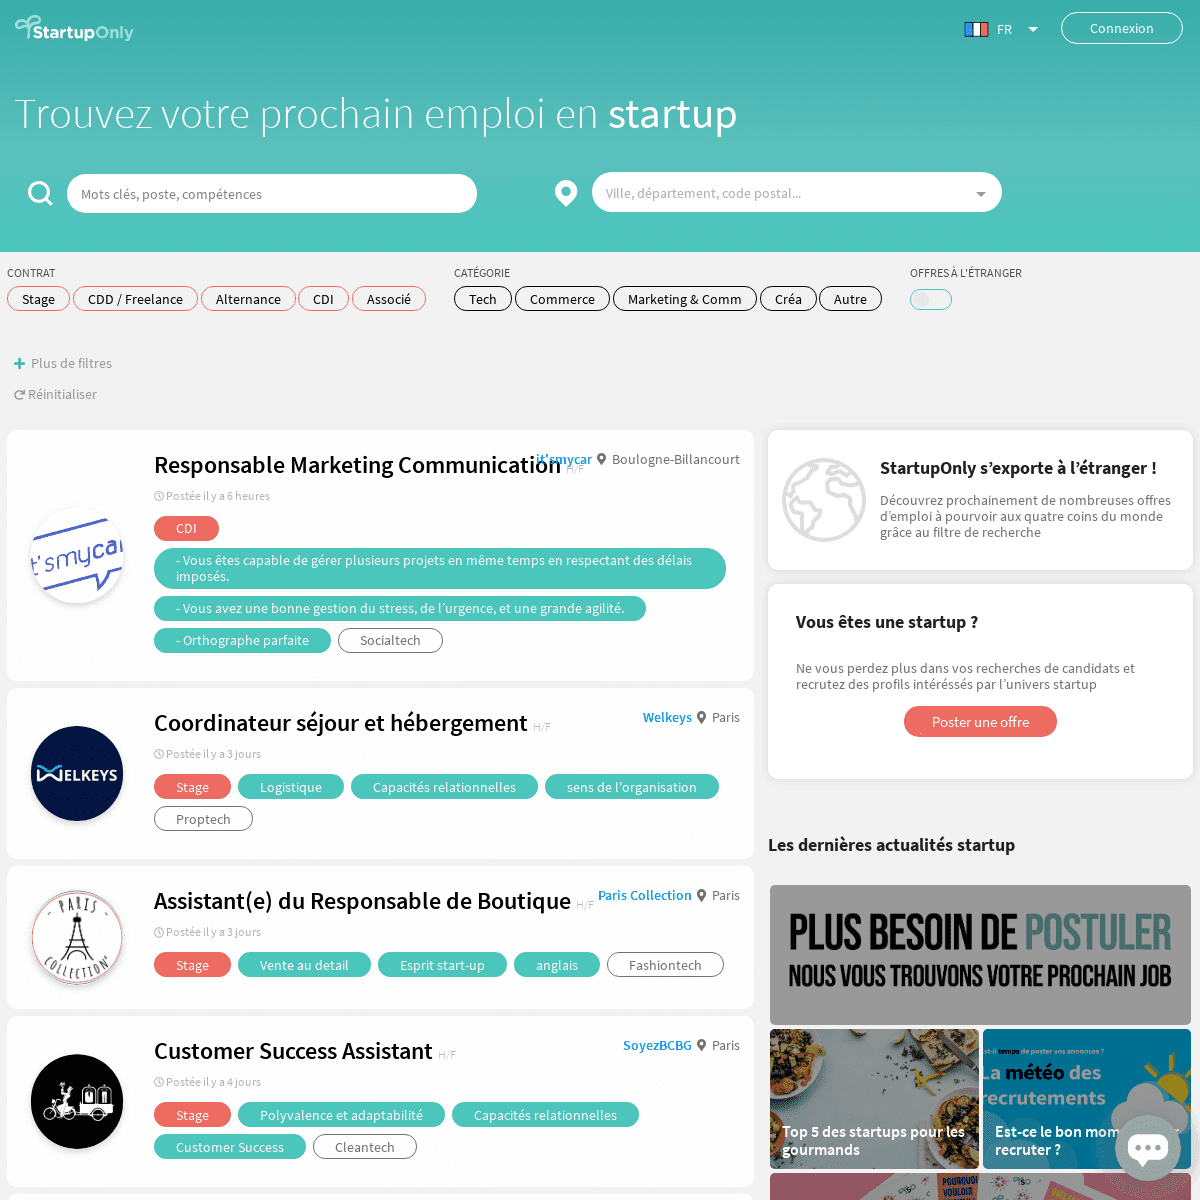 A complete backup of startuponly.com